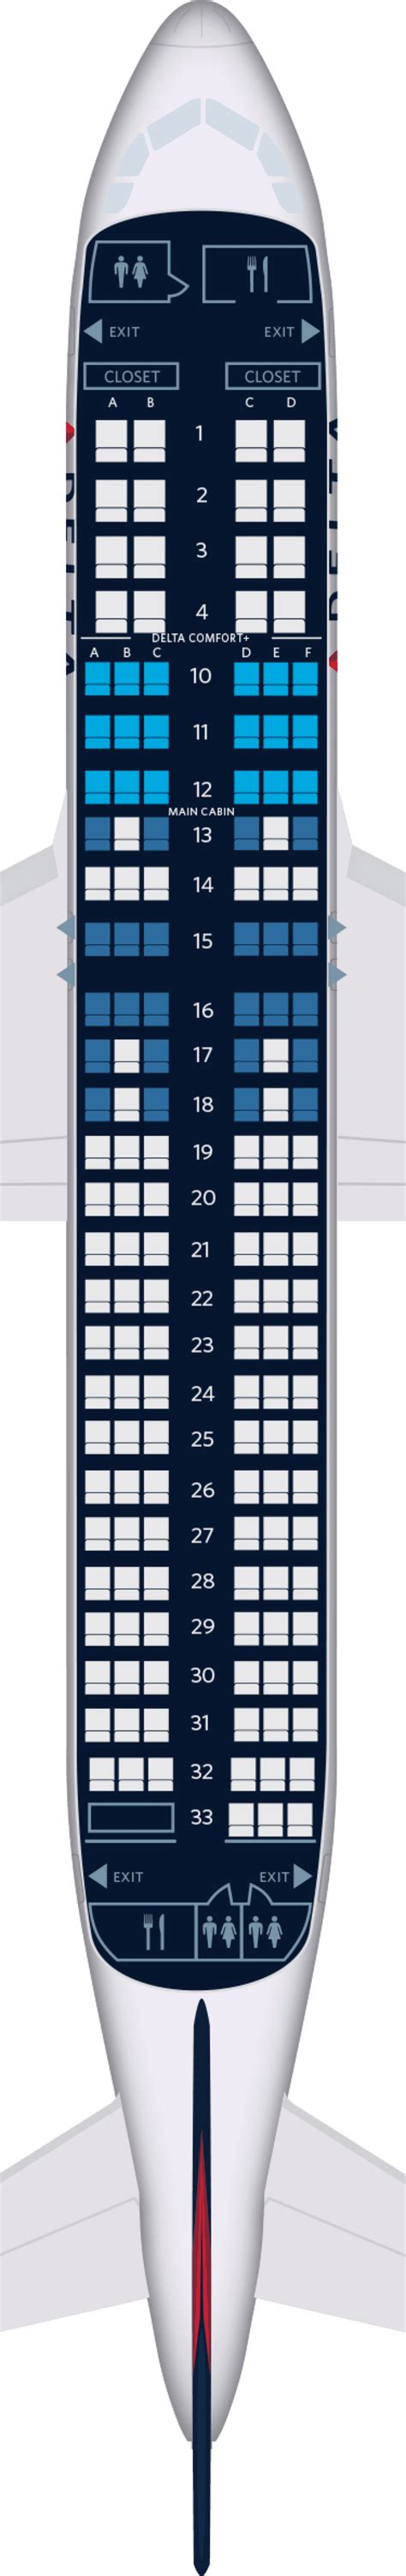 Airbus A Seating Chart United Airlines Best Picture Of Chart Anyimage Org